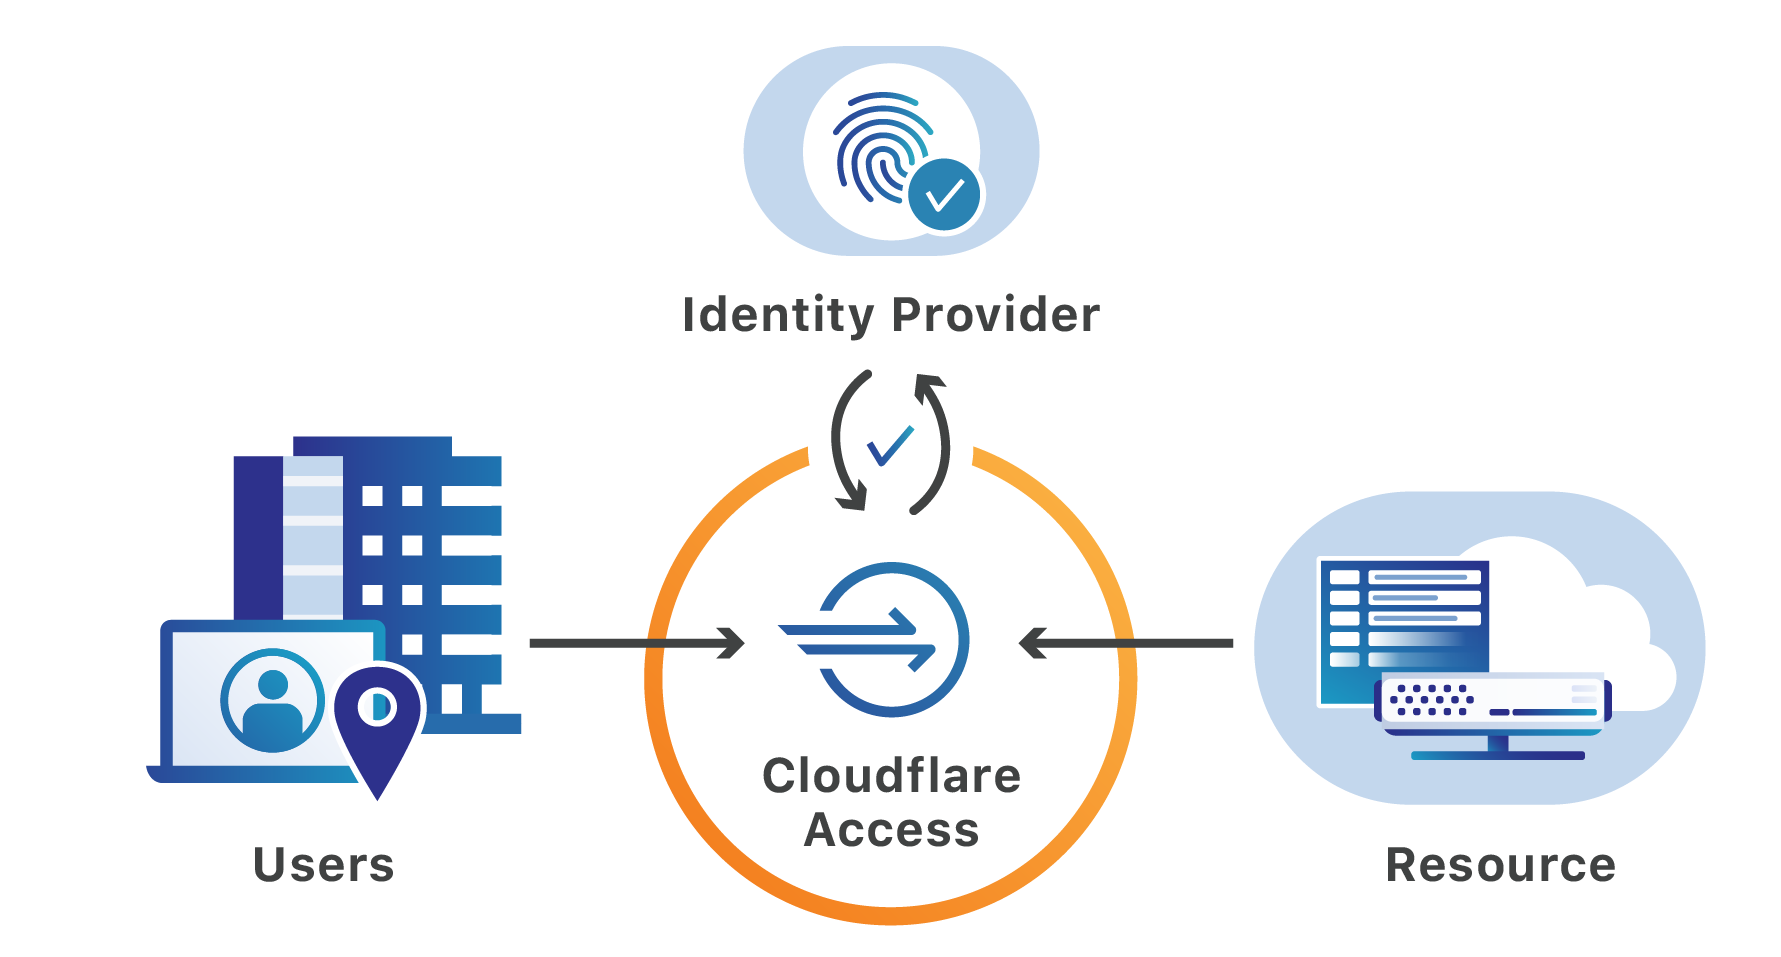 Helping mitigate the Citrix NetScaler CVE with Cloudflare Access